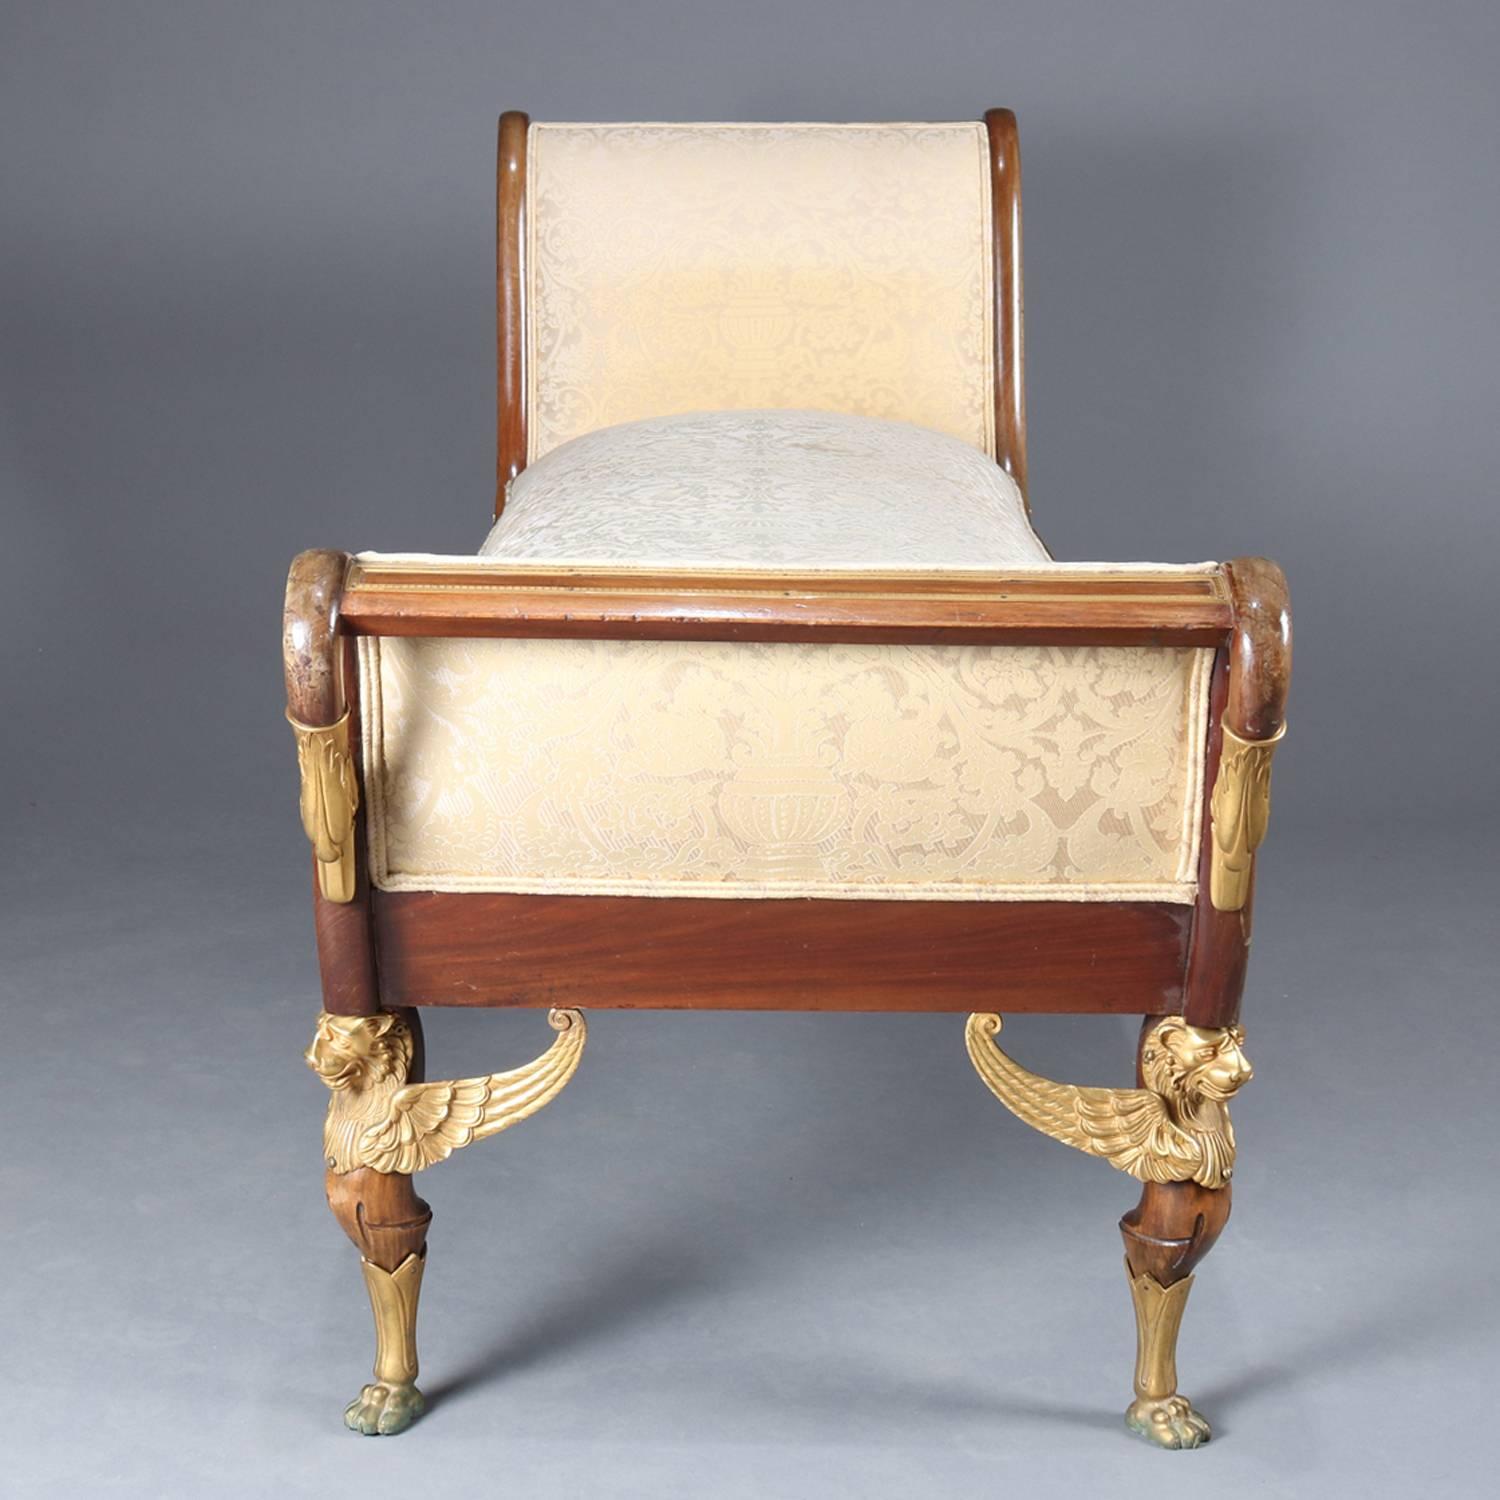 Louis XV French Empire Neoclassical Mahogany and Figural Ormolu Recamier, 19th Century